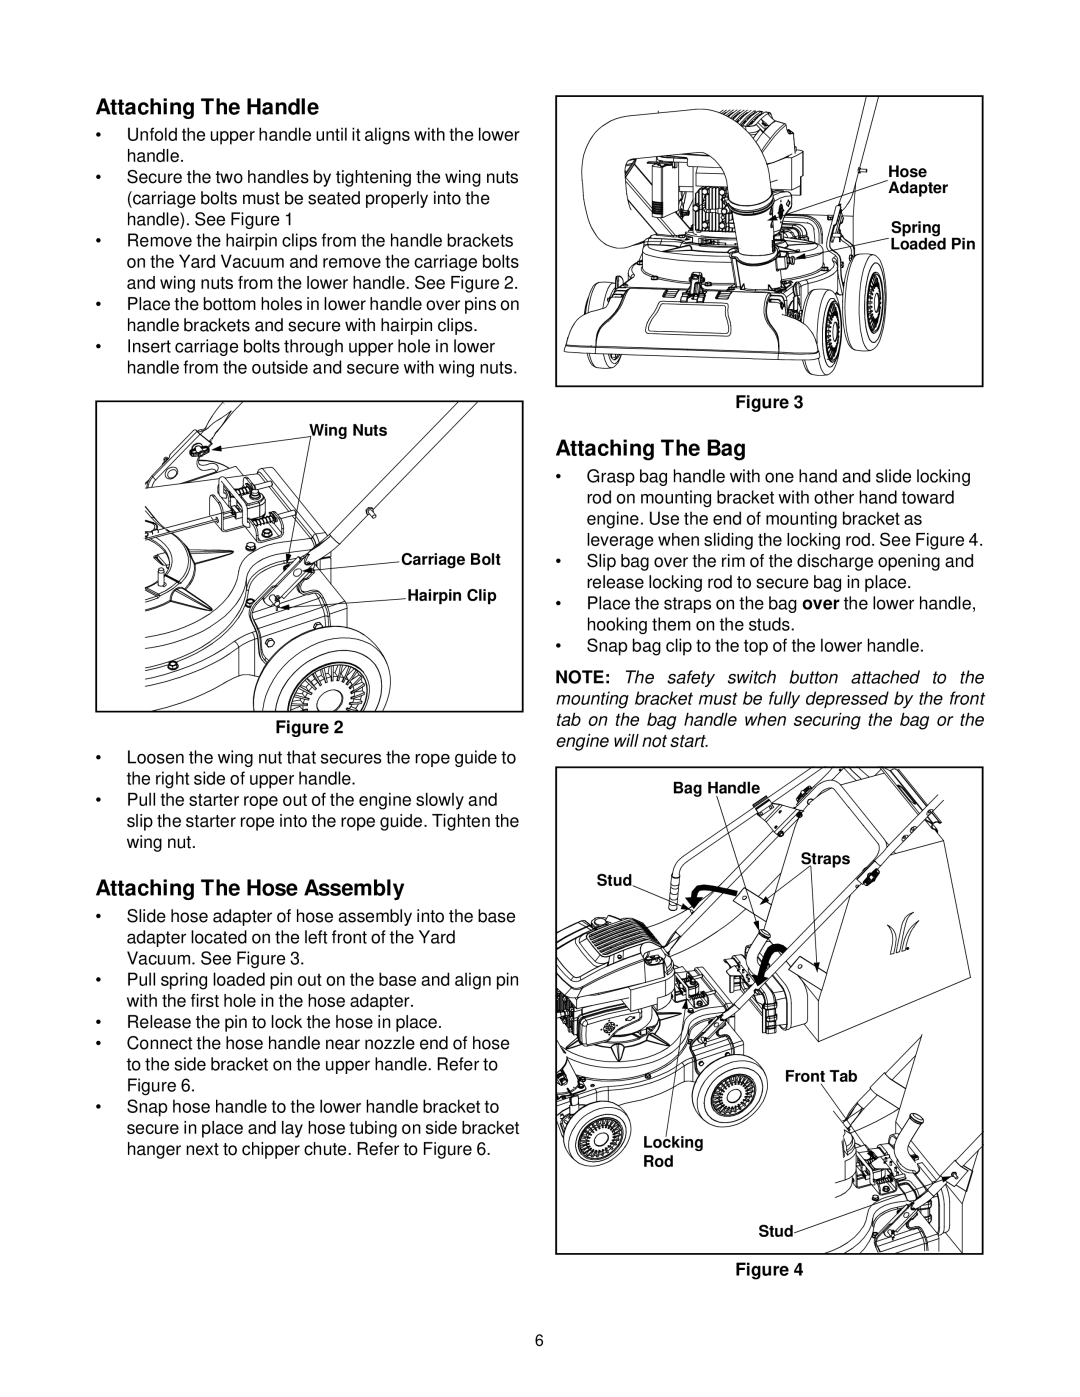 Yard-Man 24A-060F401 manual Attaching The Handle, Attaching The Hose Assembly, Attaching The Bag 